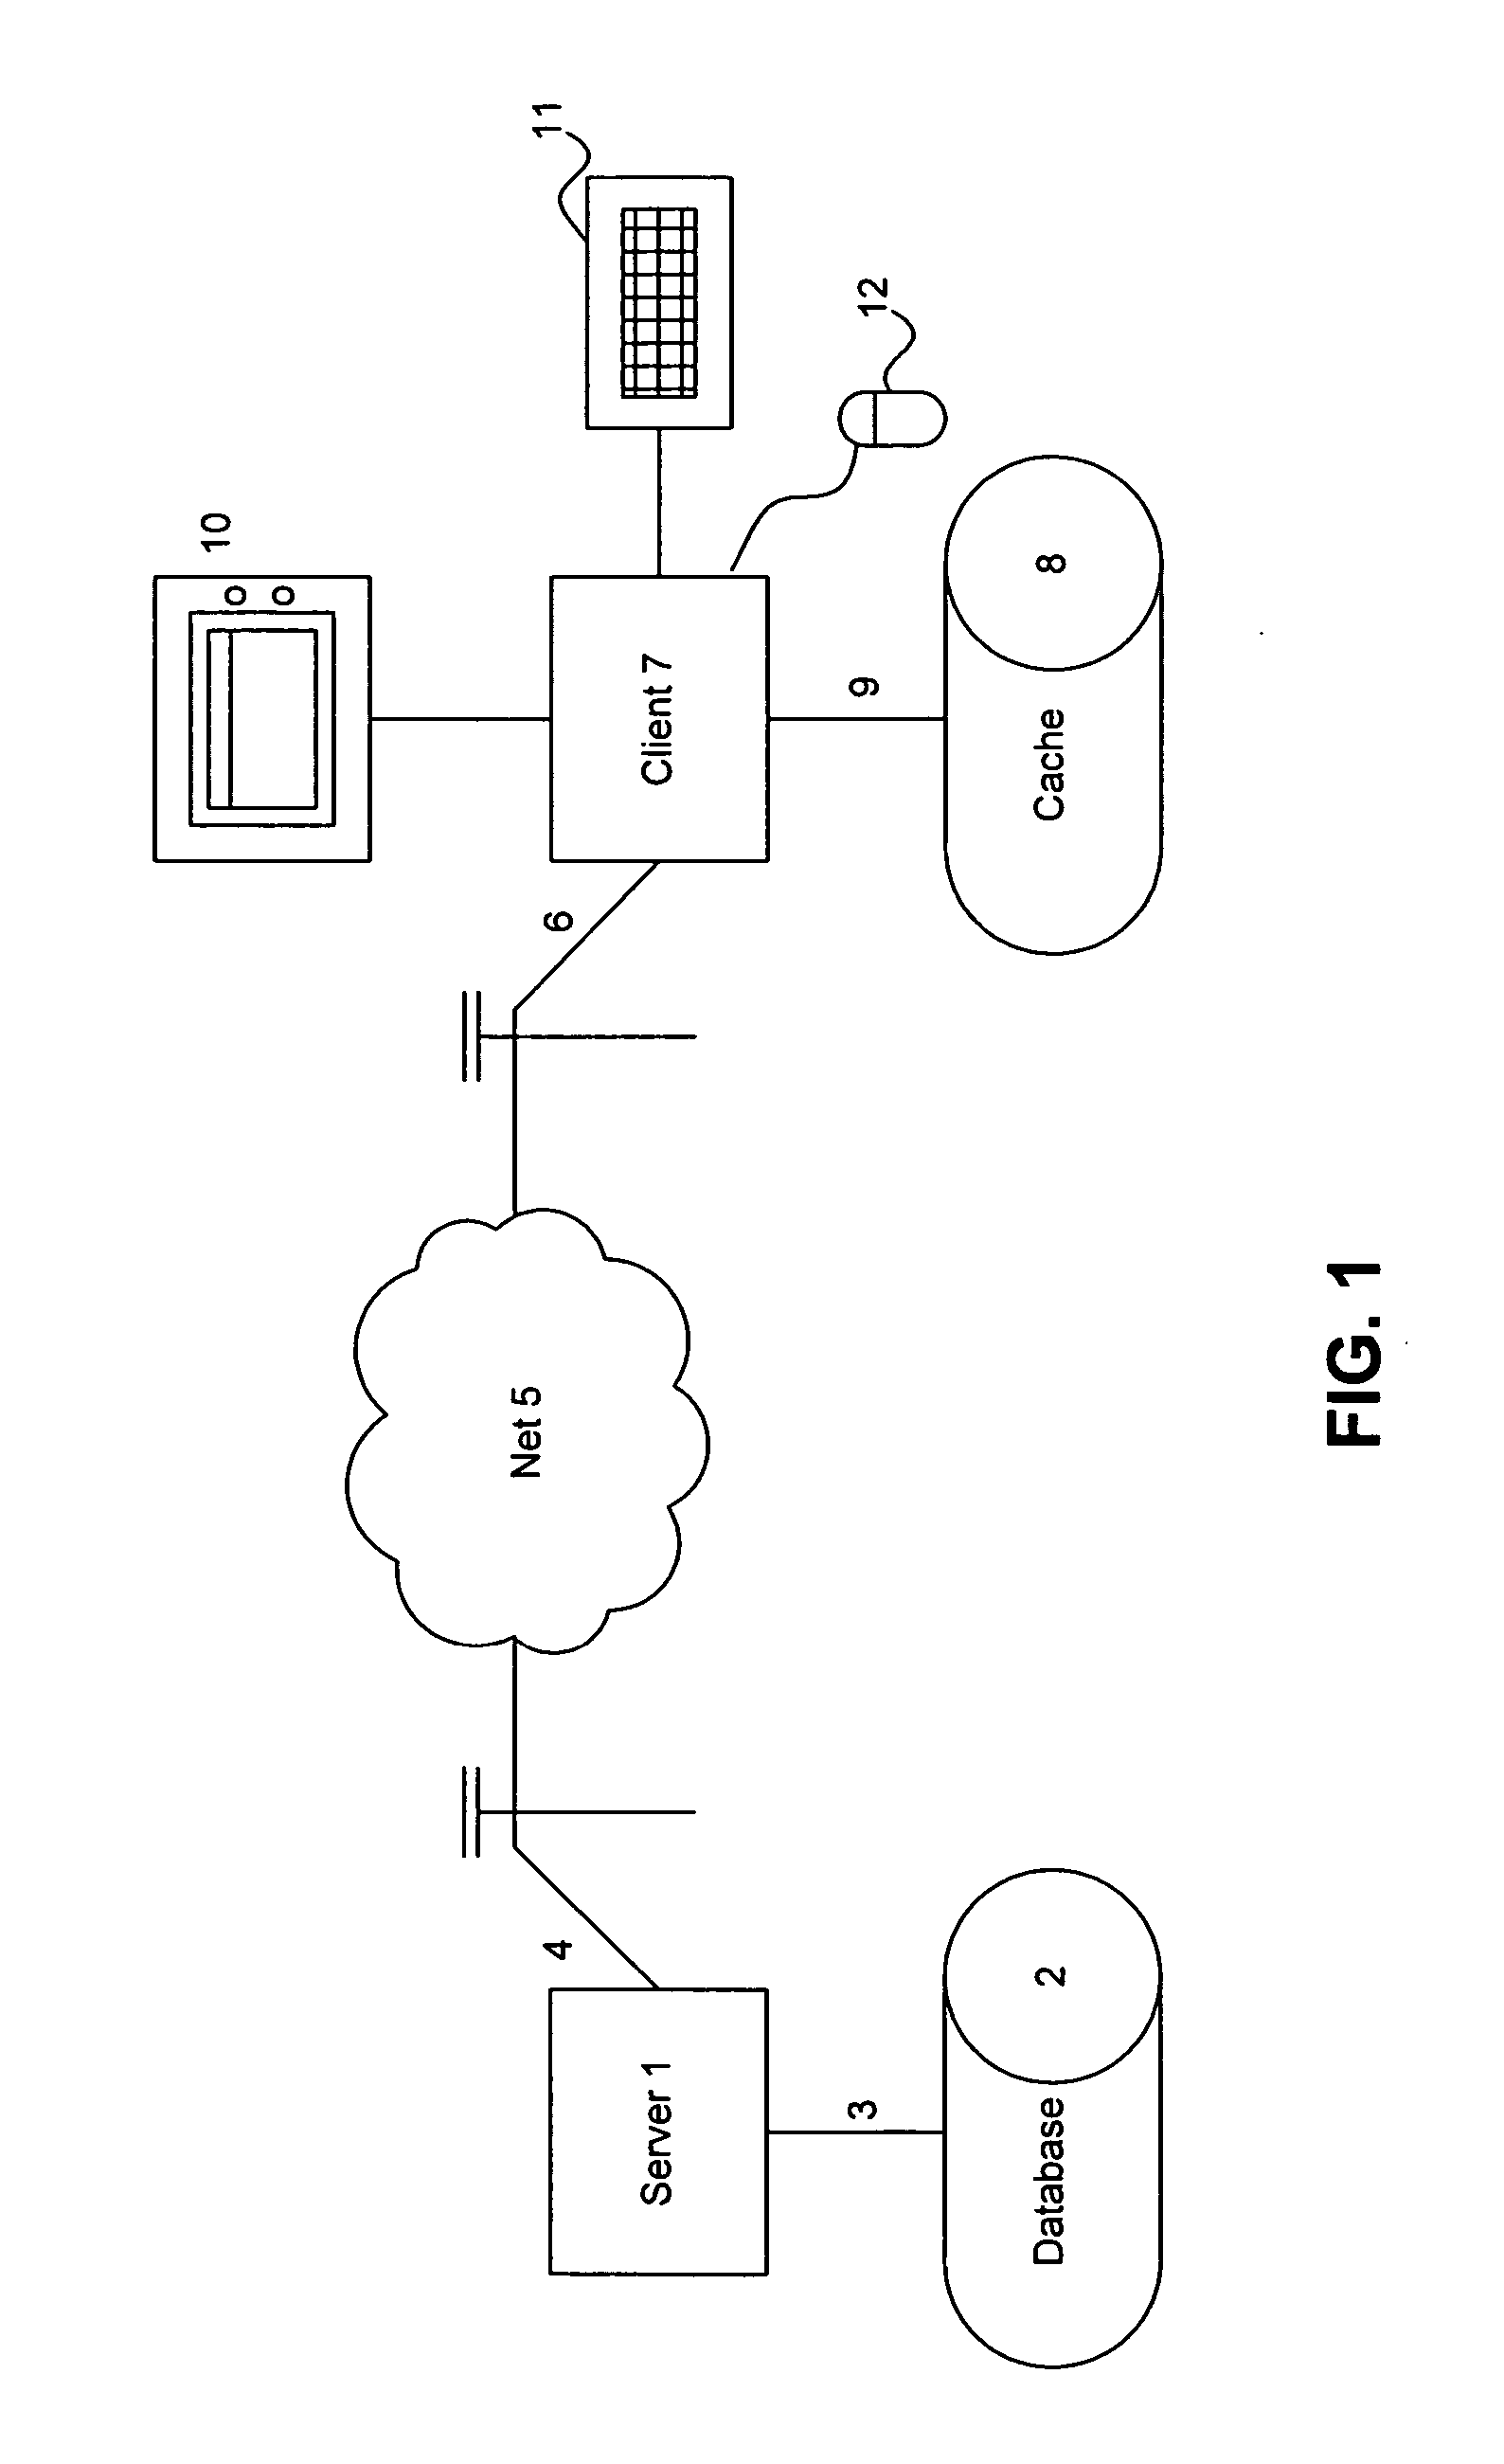 Method for queued overlap transfer of files